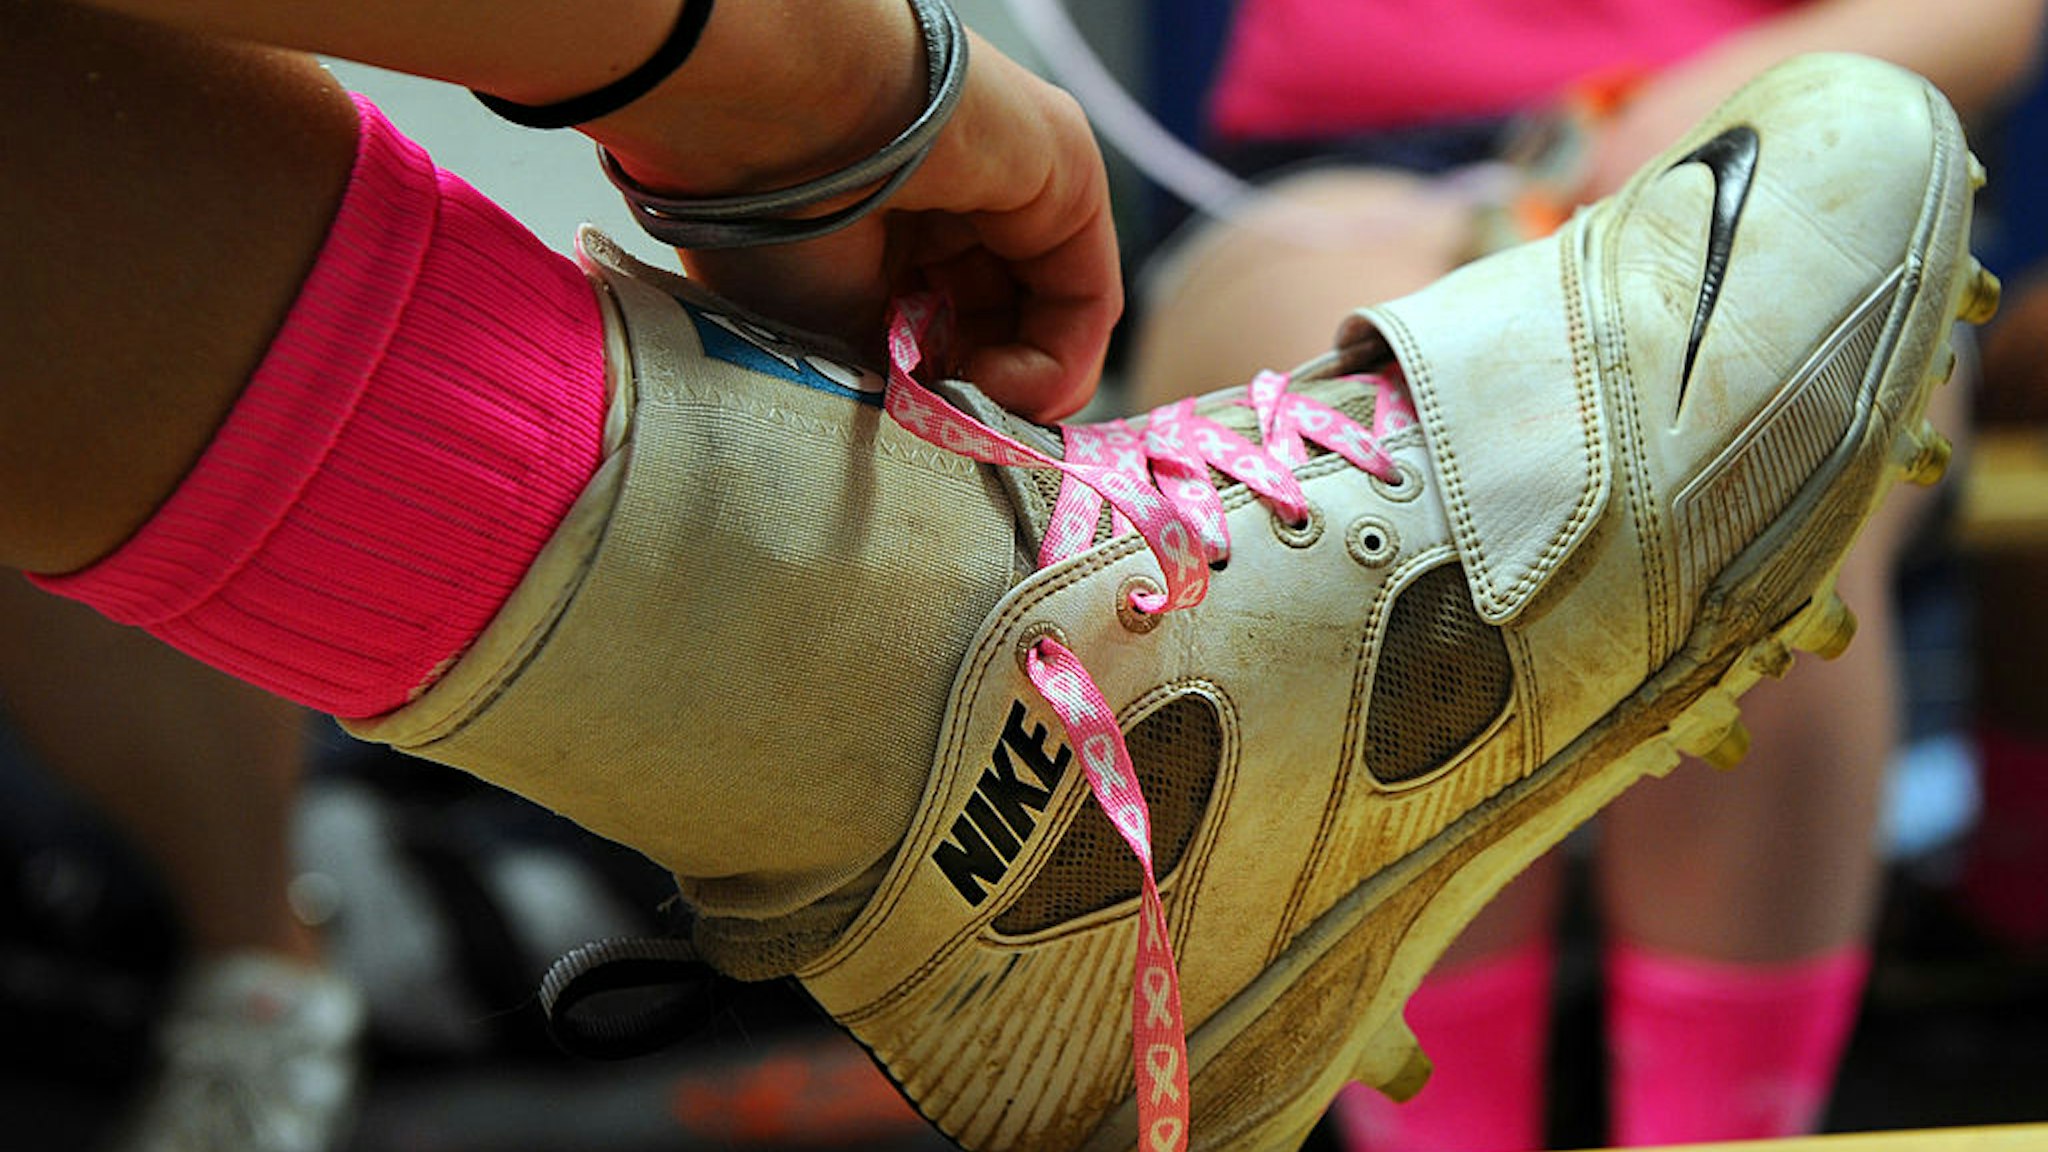 ASHBURN, VA- APRIL 4: A Stone Bridge girls' varsity lacrosse player relaces her cleats before the start of their Liberty District Tournament game against South Lakes on Friday, May 4, 2012. Thirty girls' teams in Northern Virginia wore at least pink shoelaces, pink ribbons, and pink sports wrap as part of the Virginia Northern Region Girls Lacrosse "VHSL Tournament For A Cure". (Photo by Toni L. Sandys/The Washington Post via Getty Images)